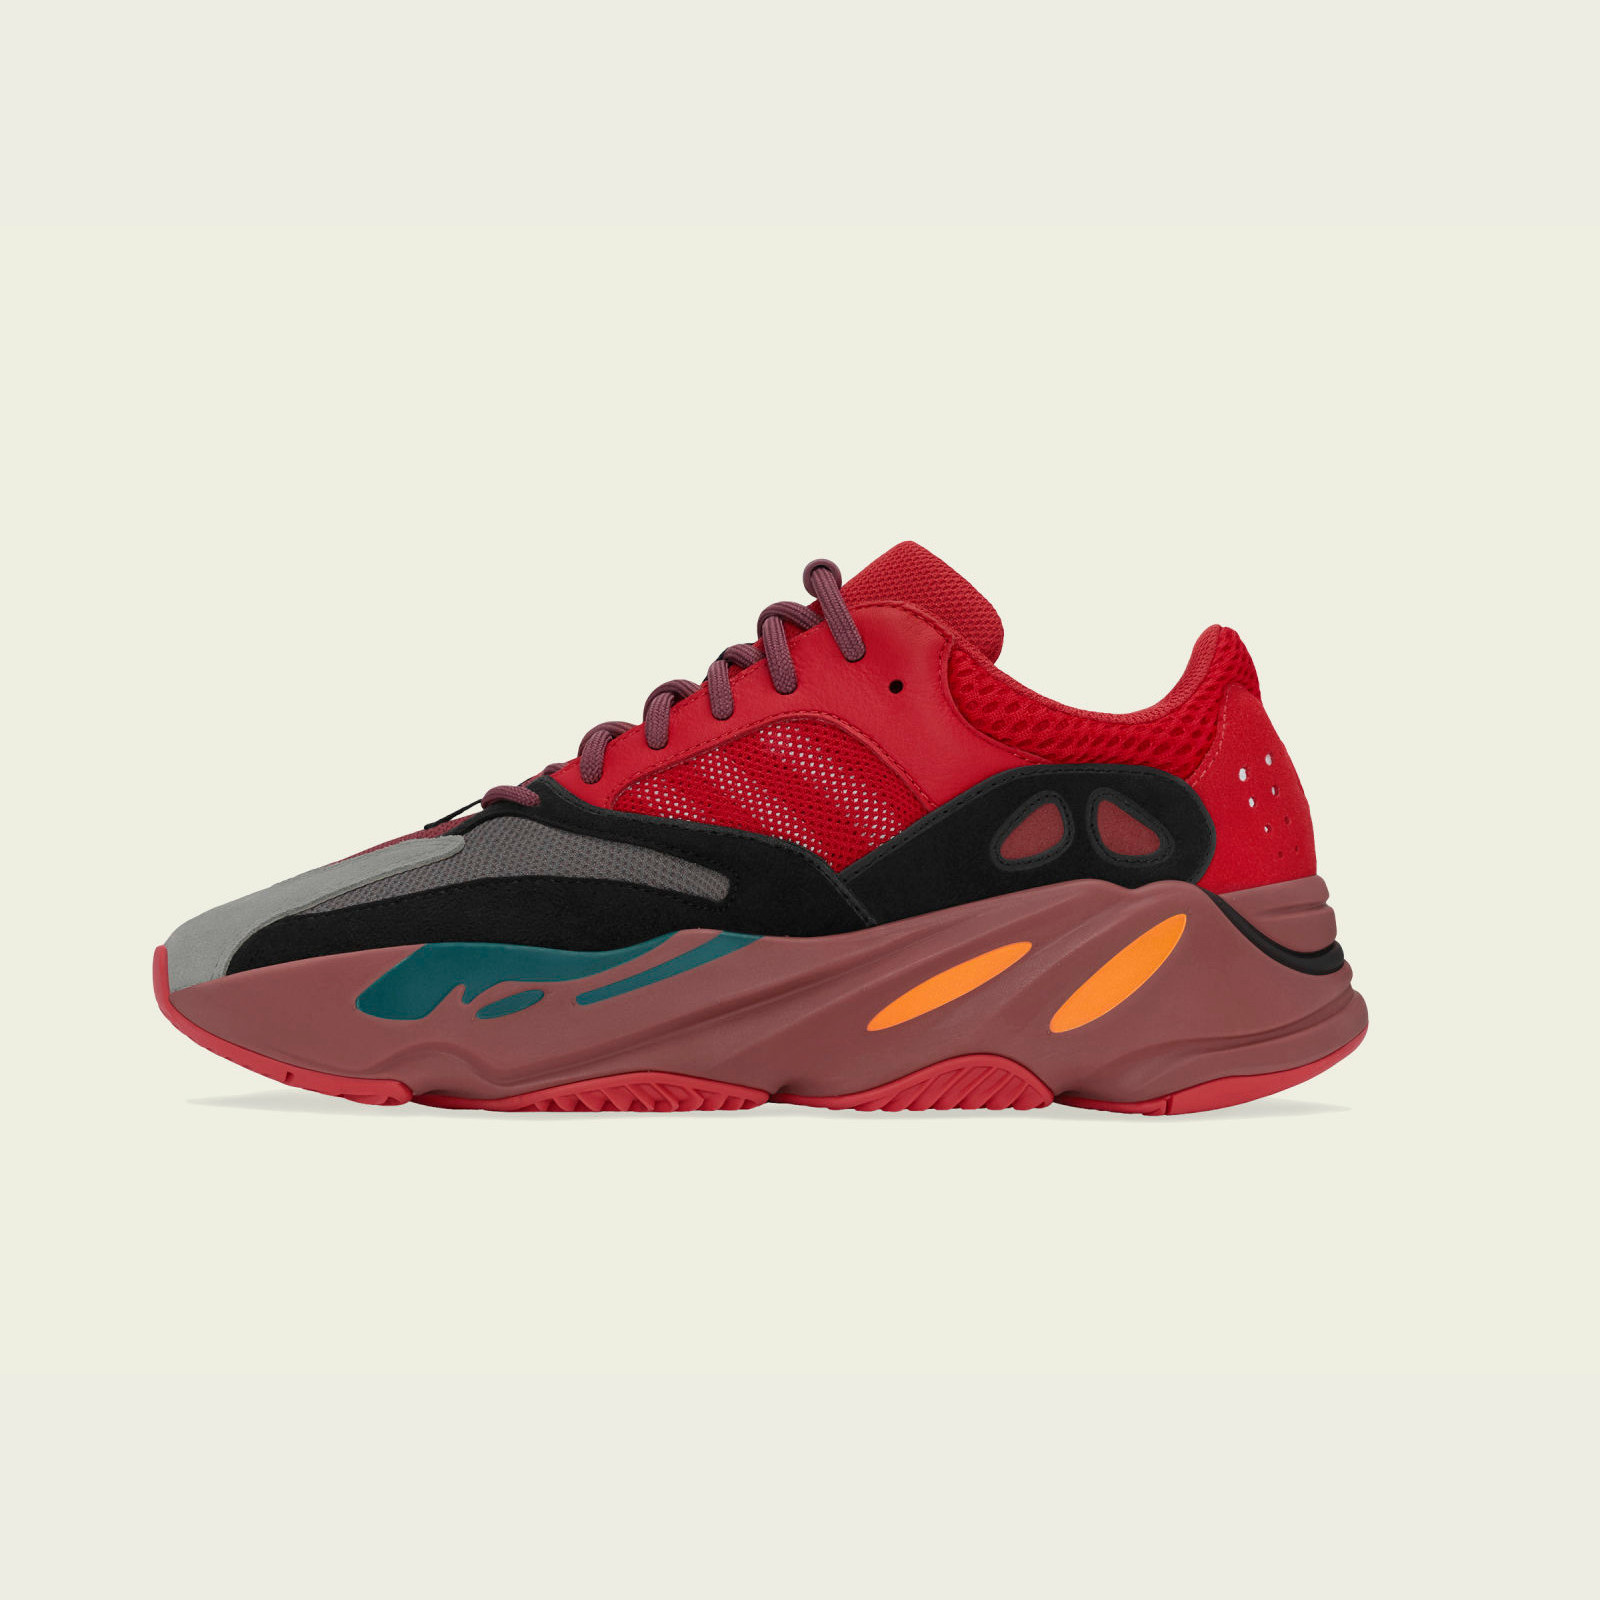 Adidas Yeezy Boost 700
« Hi-Res Red »